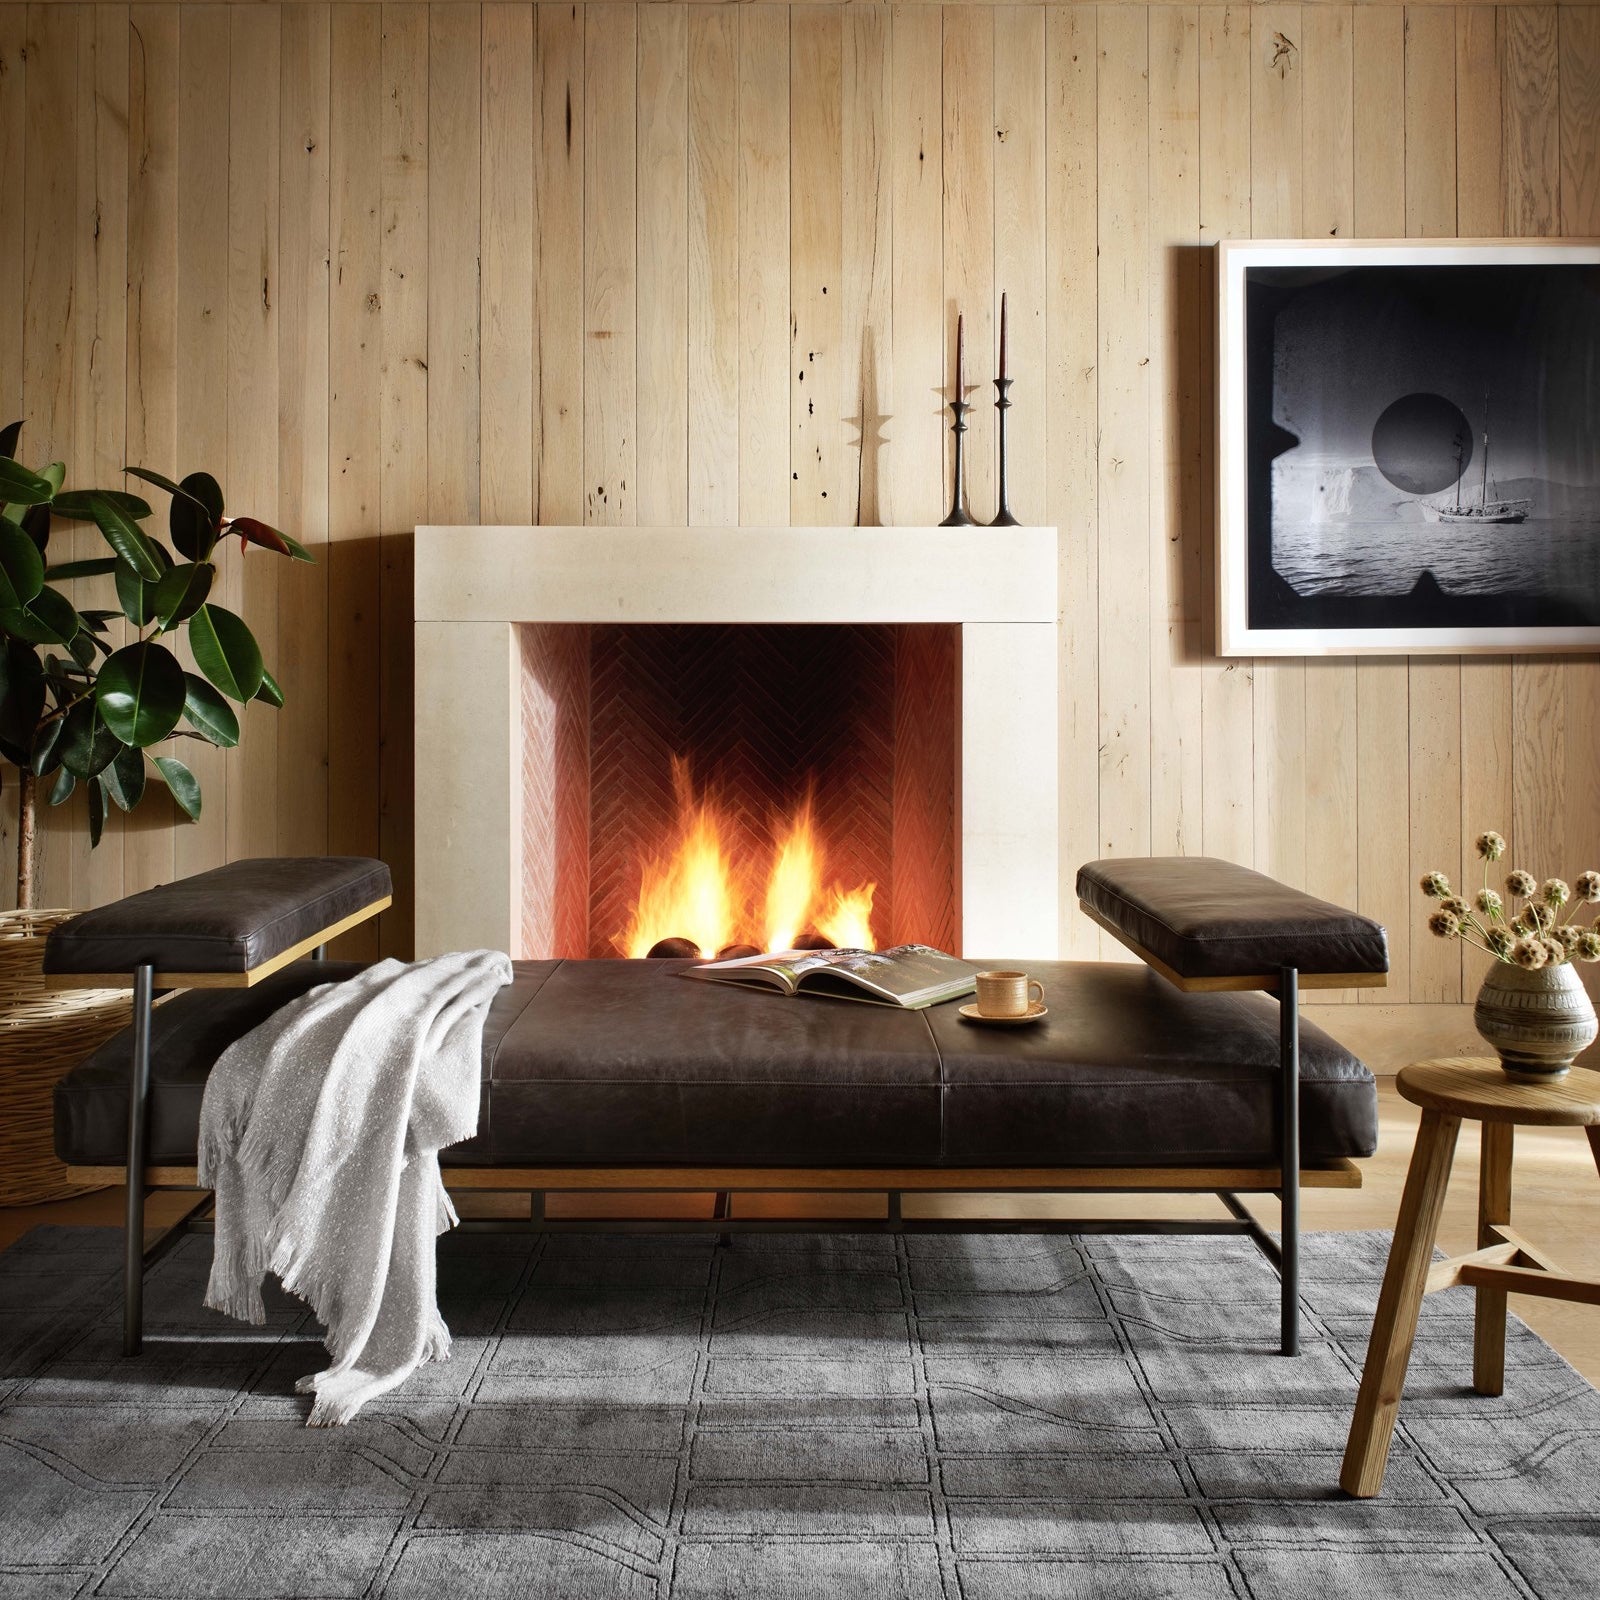 A cozy room with a fireplace and a brown leather couch, with a white blanket on top of it. An accent stool has a cocktail with an arrangement.